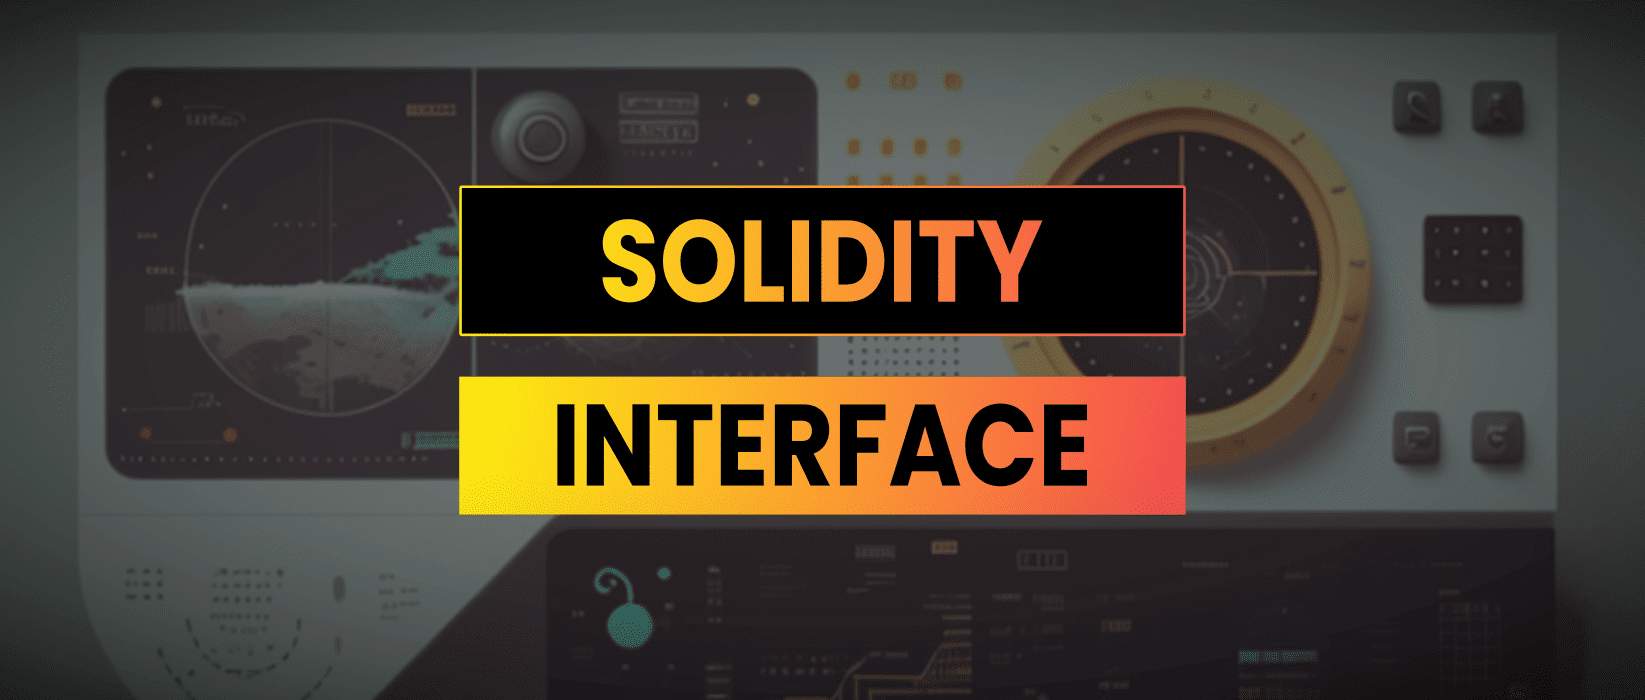 solidity interface